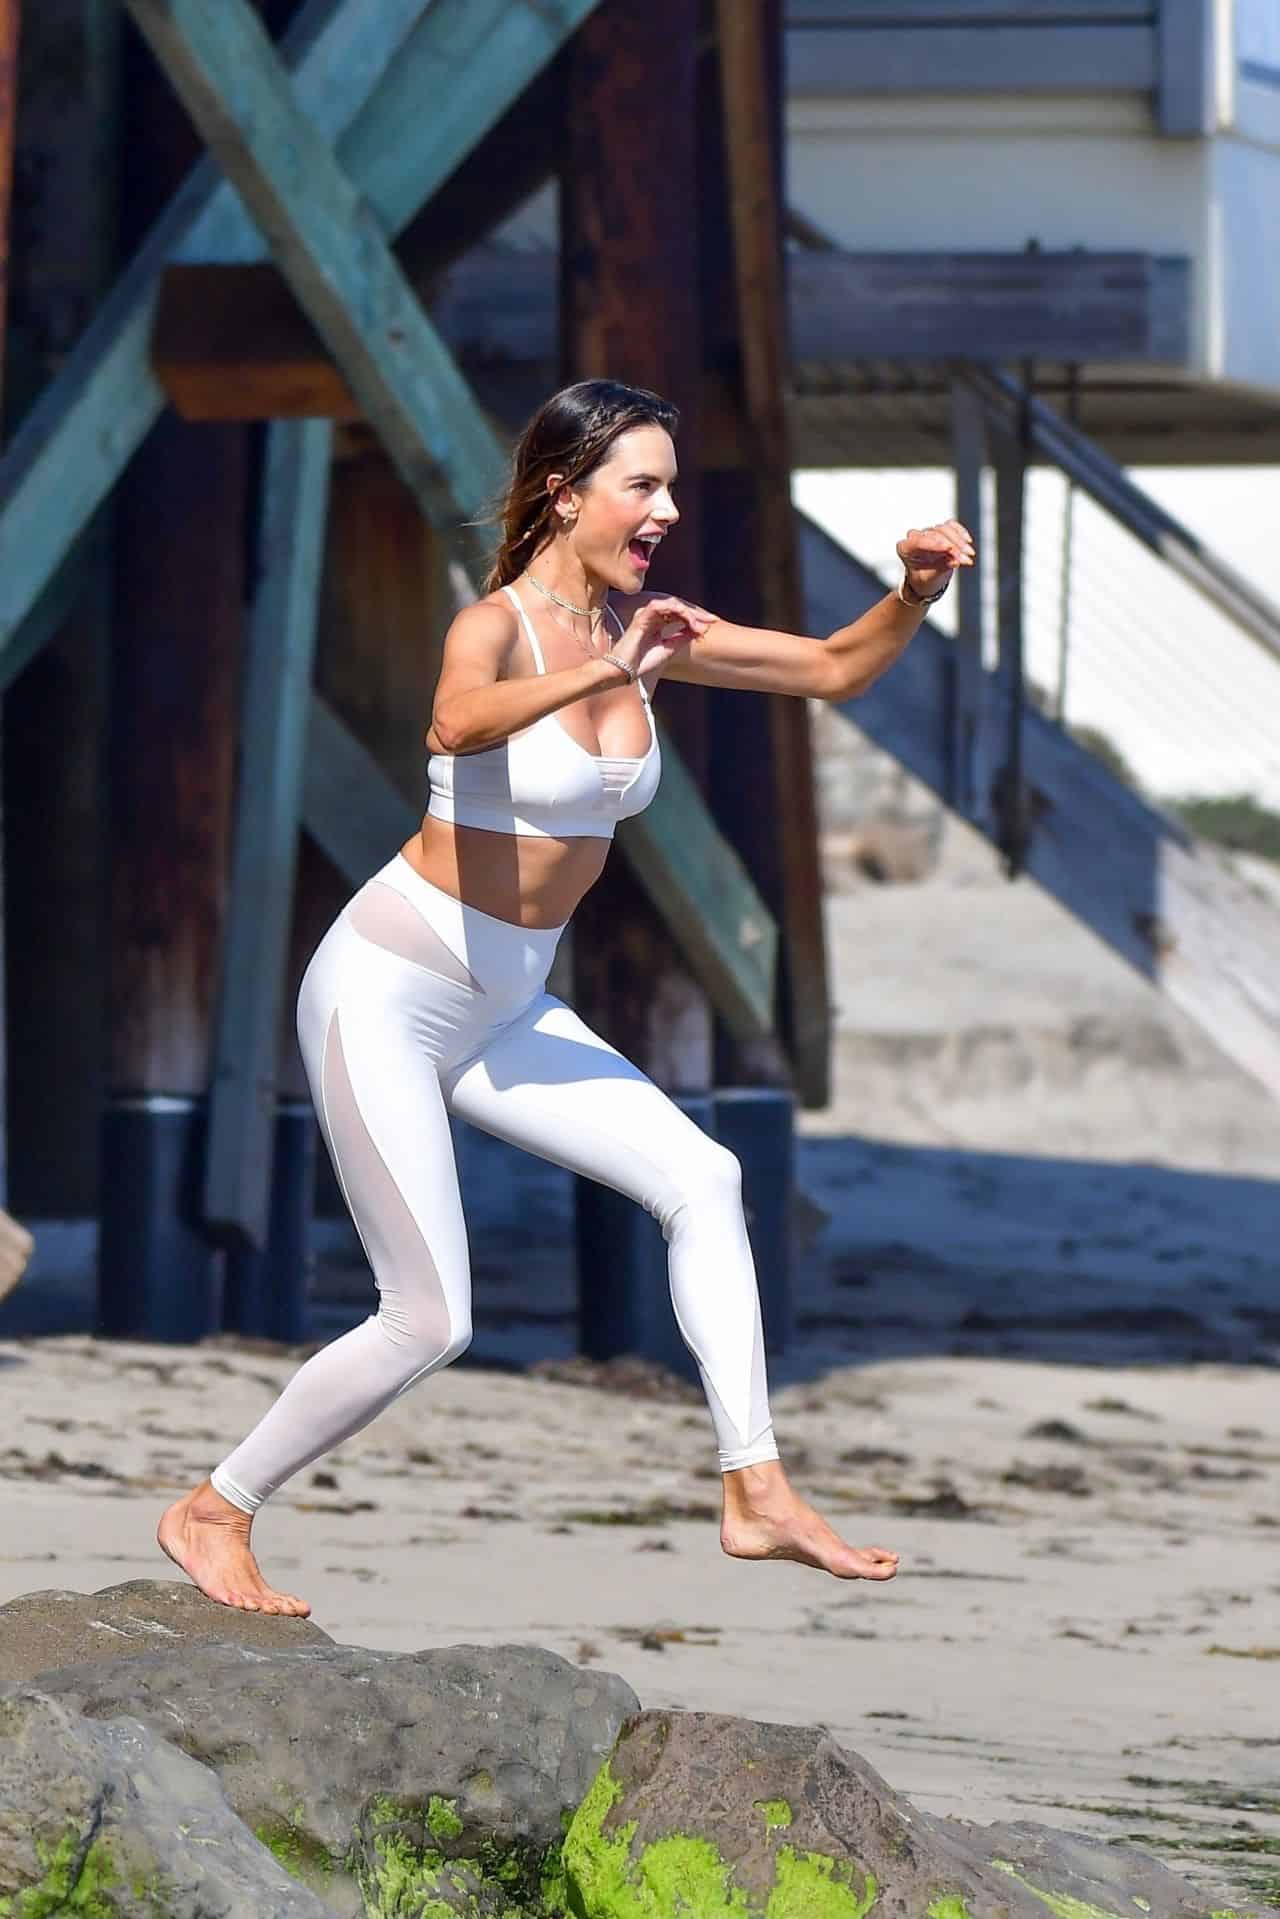 Alessandra Ambrosio in a White Workout Outfit Posing for a Beach Photoshoot